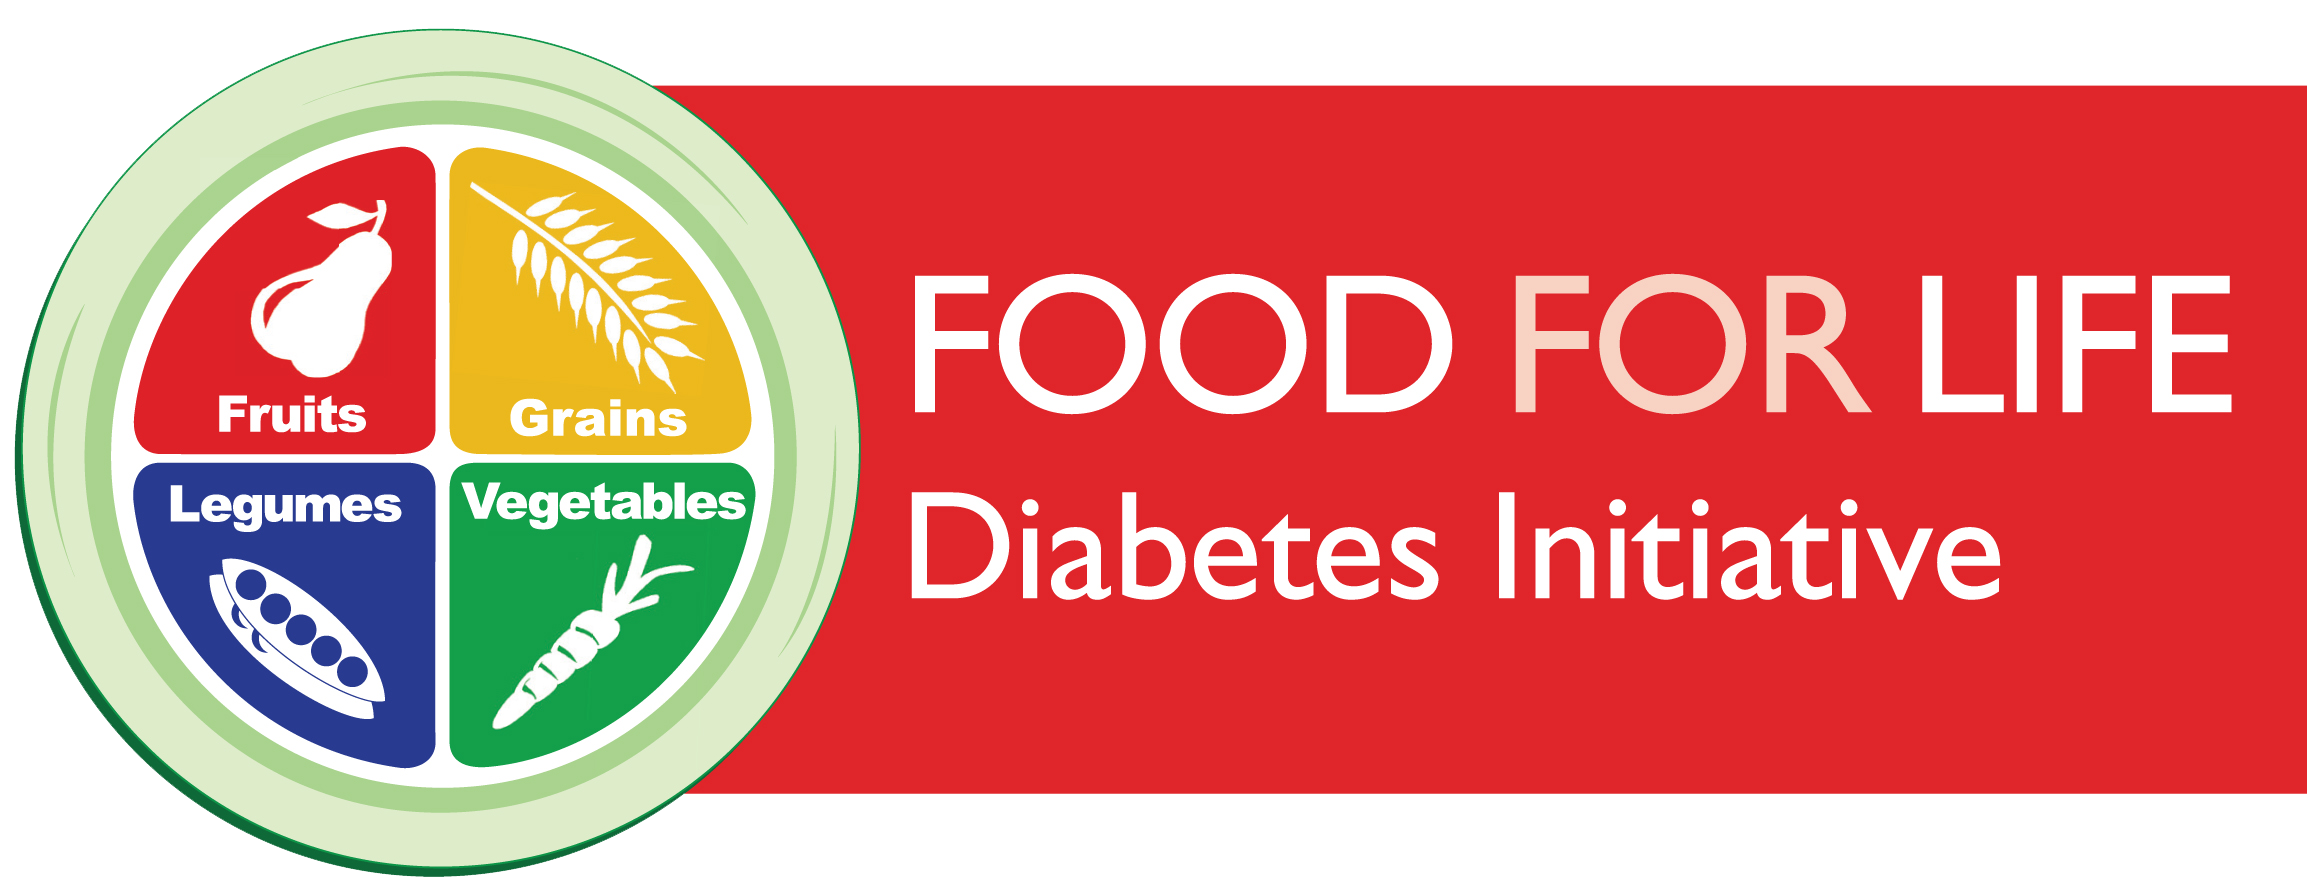 Food For Life Diabetes